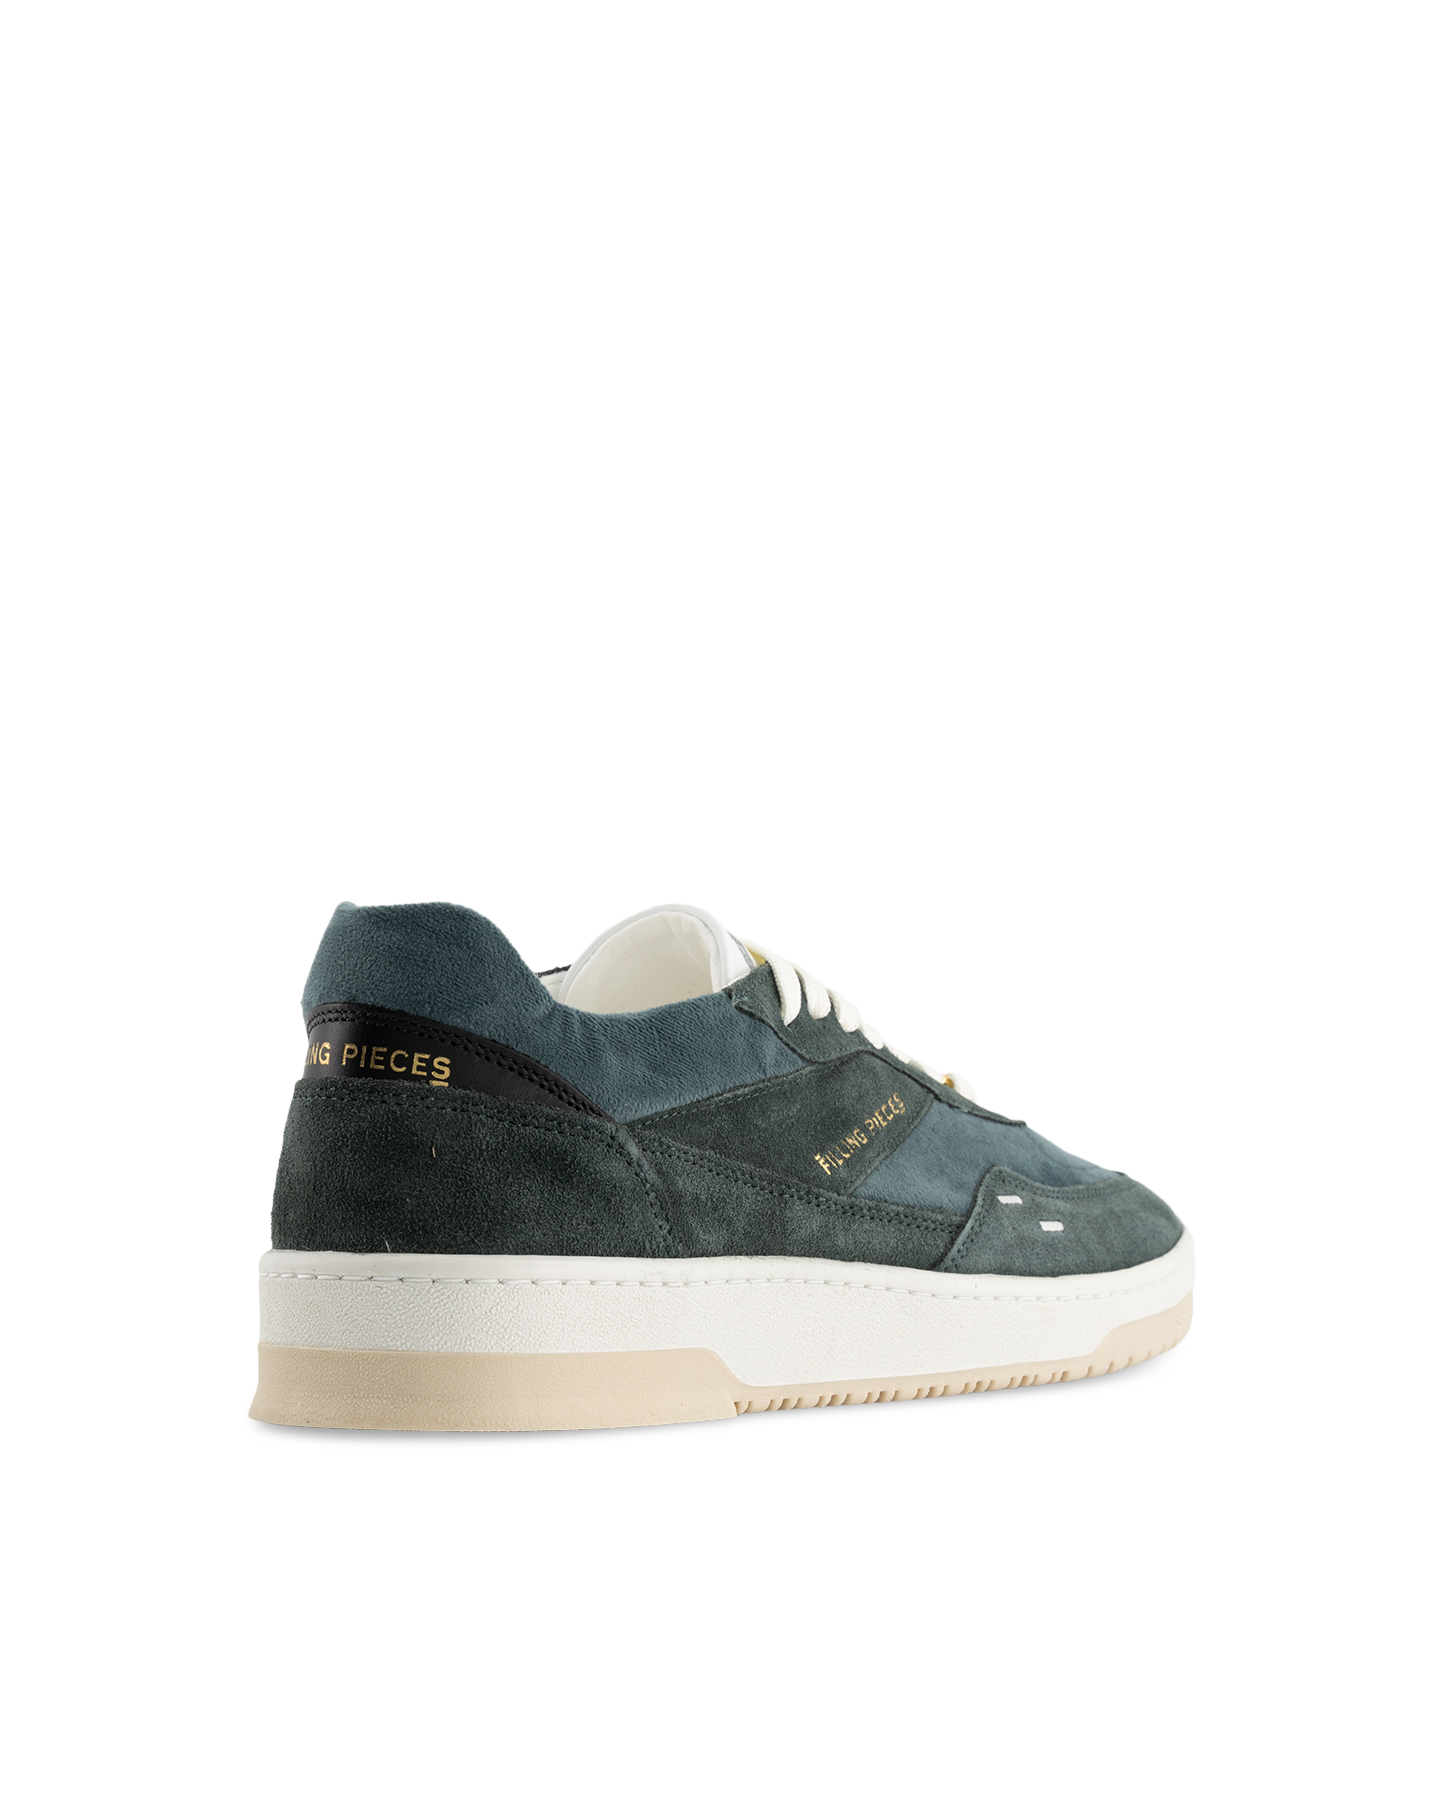 Filling Pieces Ace Spin Dice GROEN 3